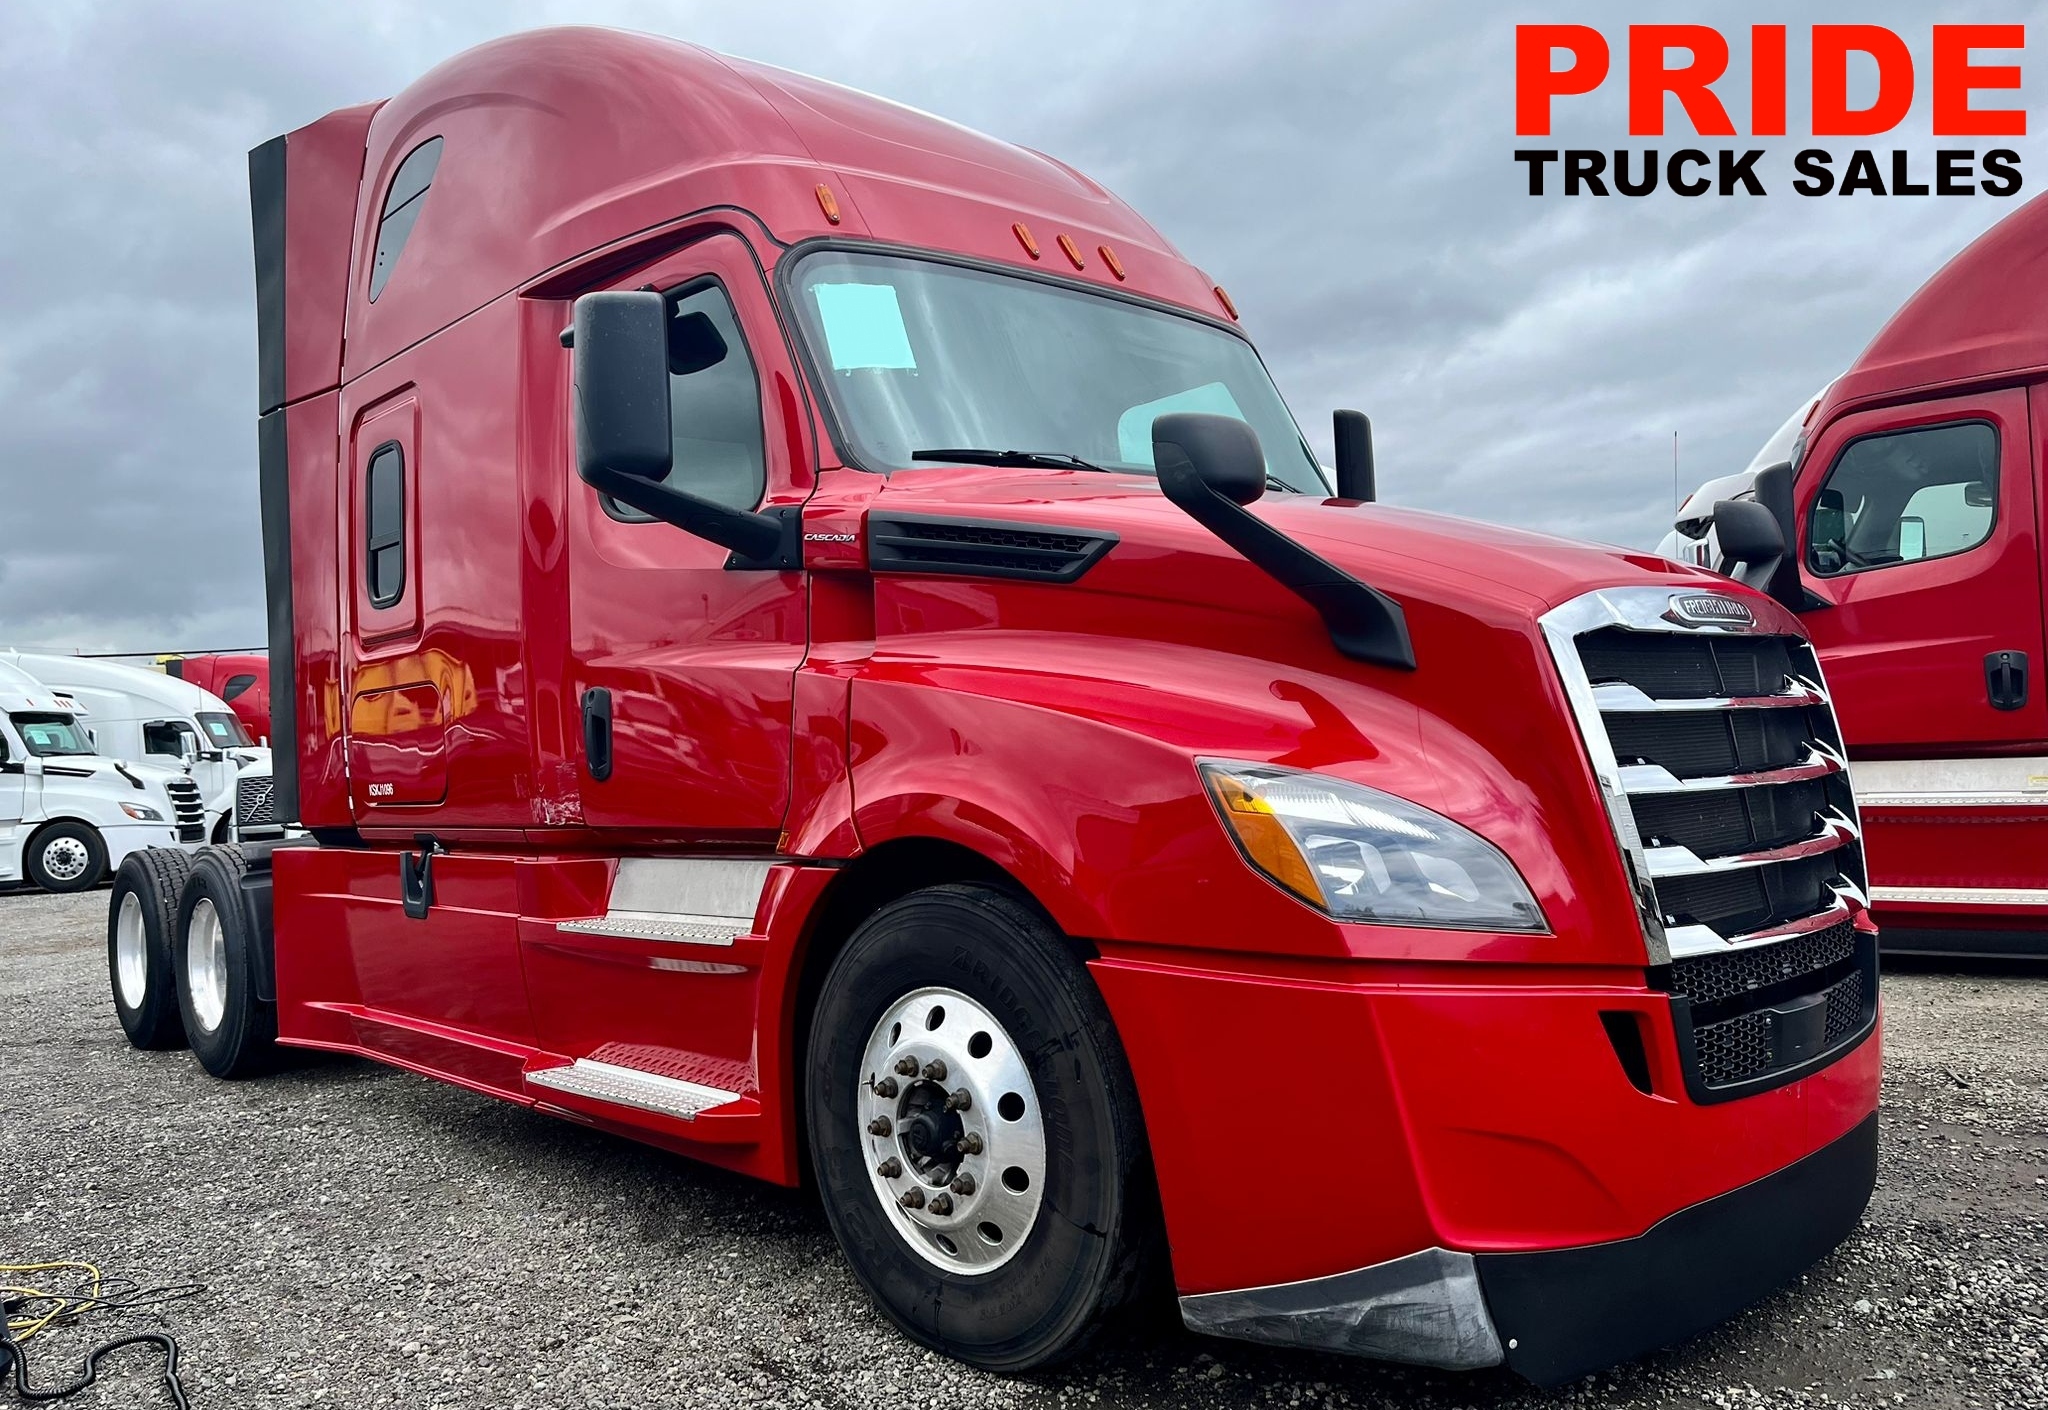 2019 Freightliner Cascadia READY TO GO UNIT...